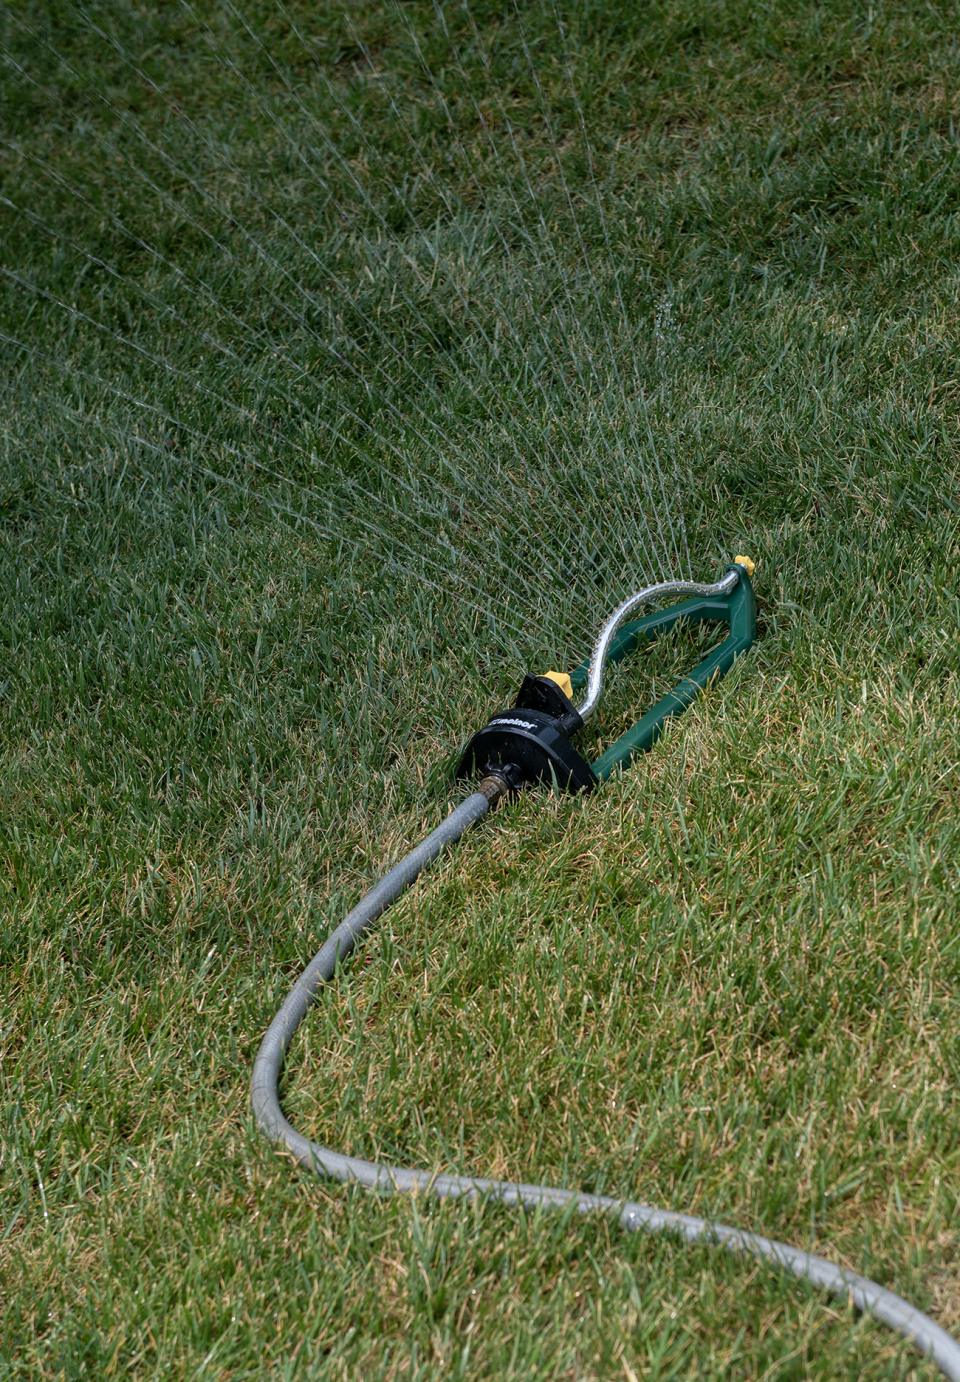 A sprinkler was set up to water the grass this week at the Kent Municipal Courthouse.